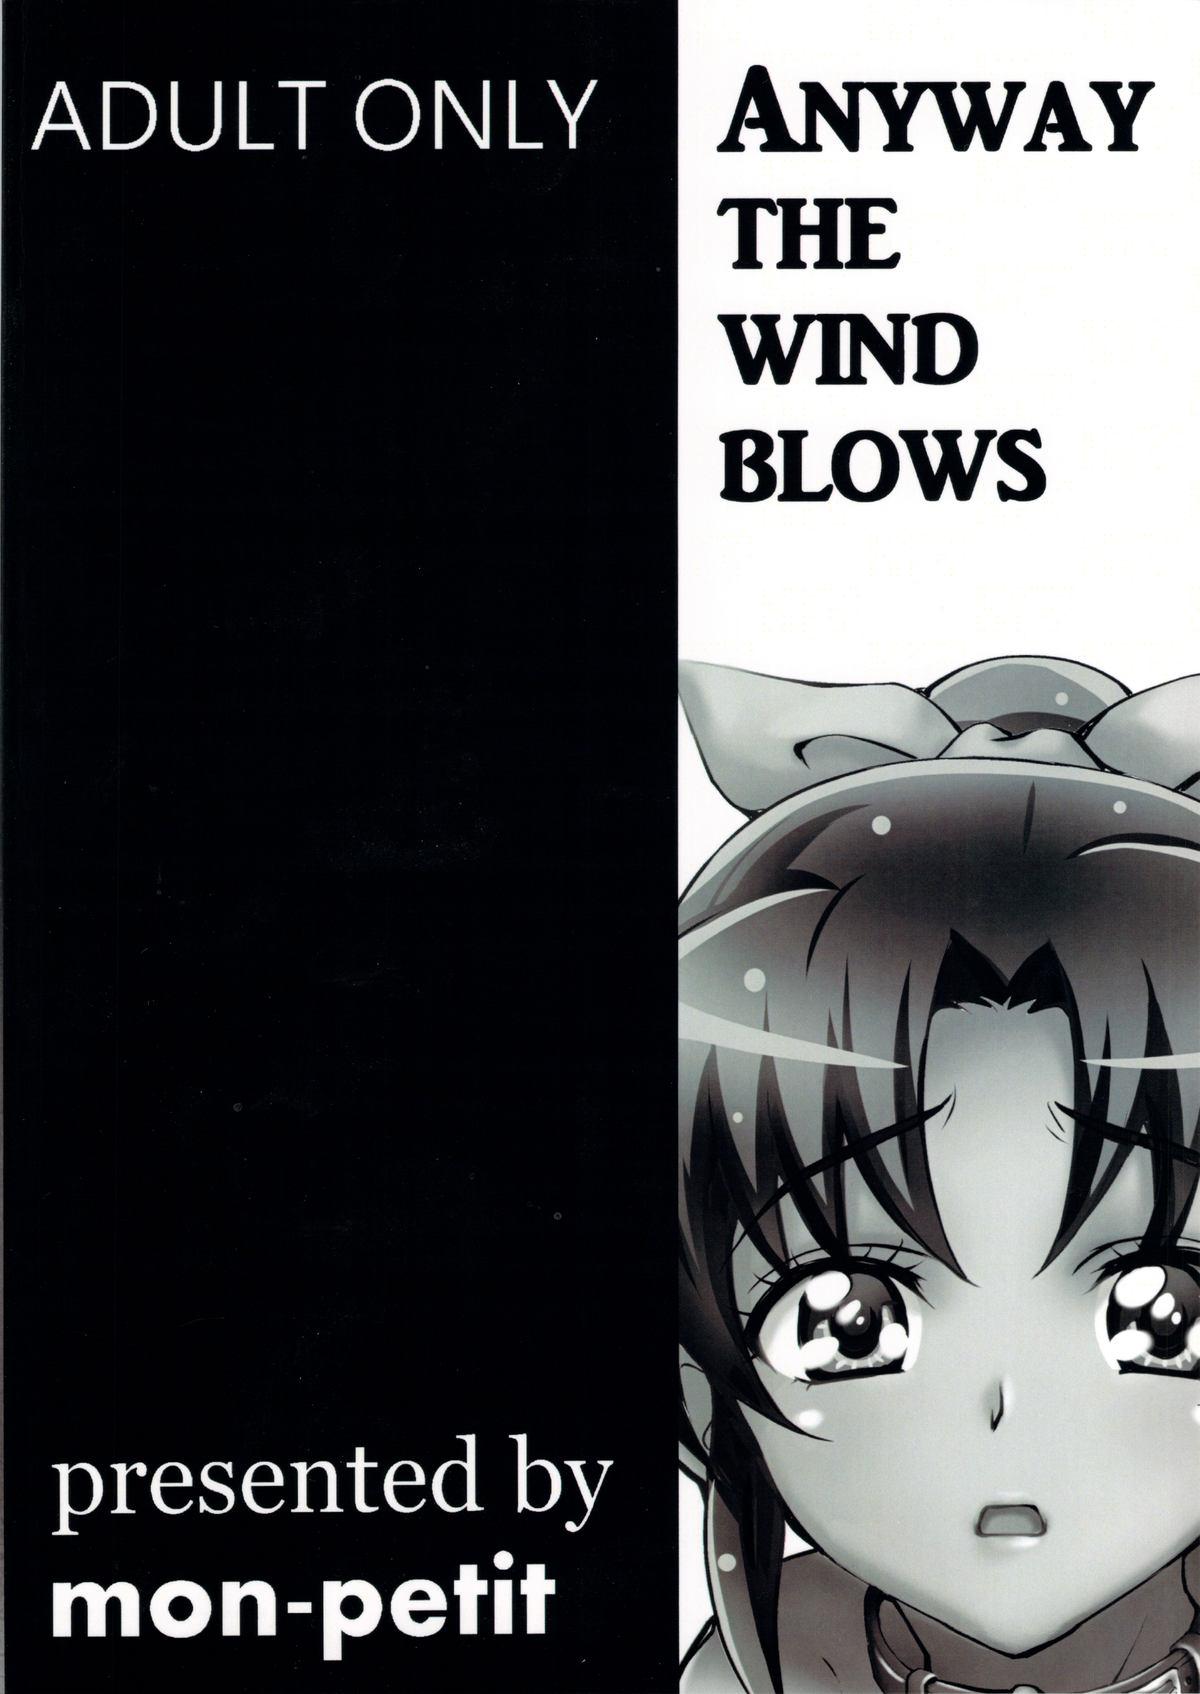 ANYWAY THE WIND BLOWS 1